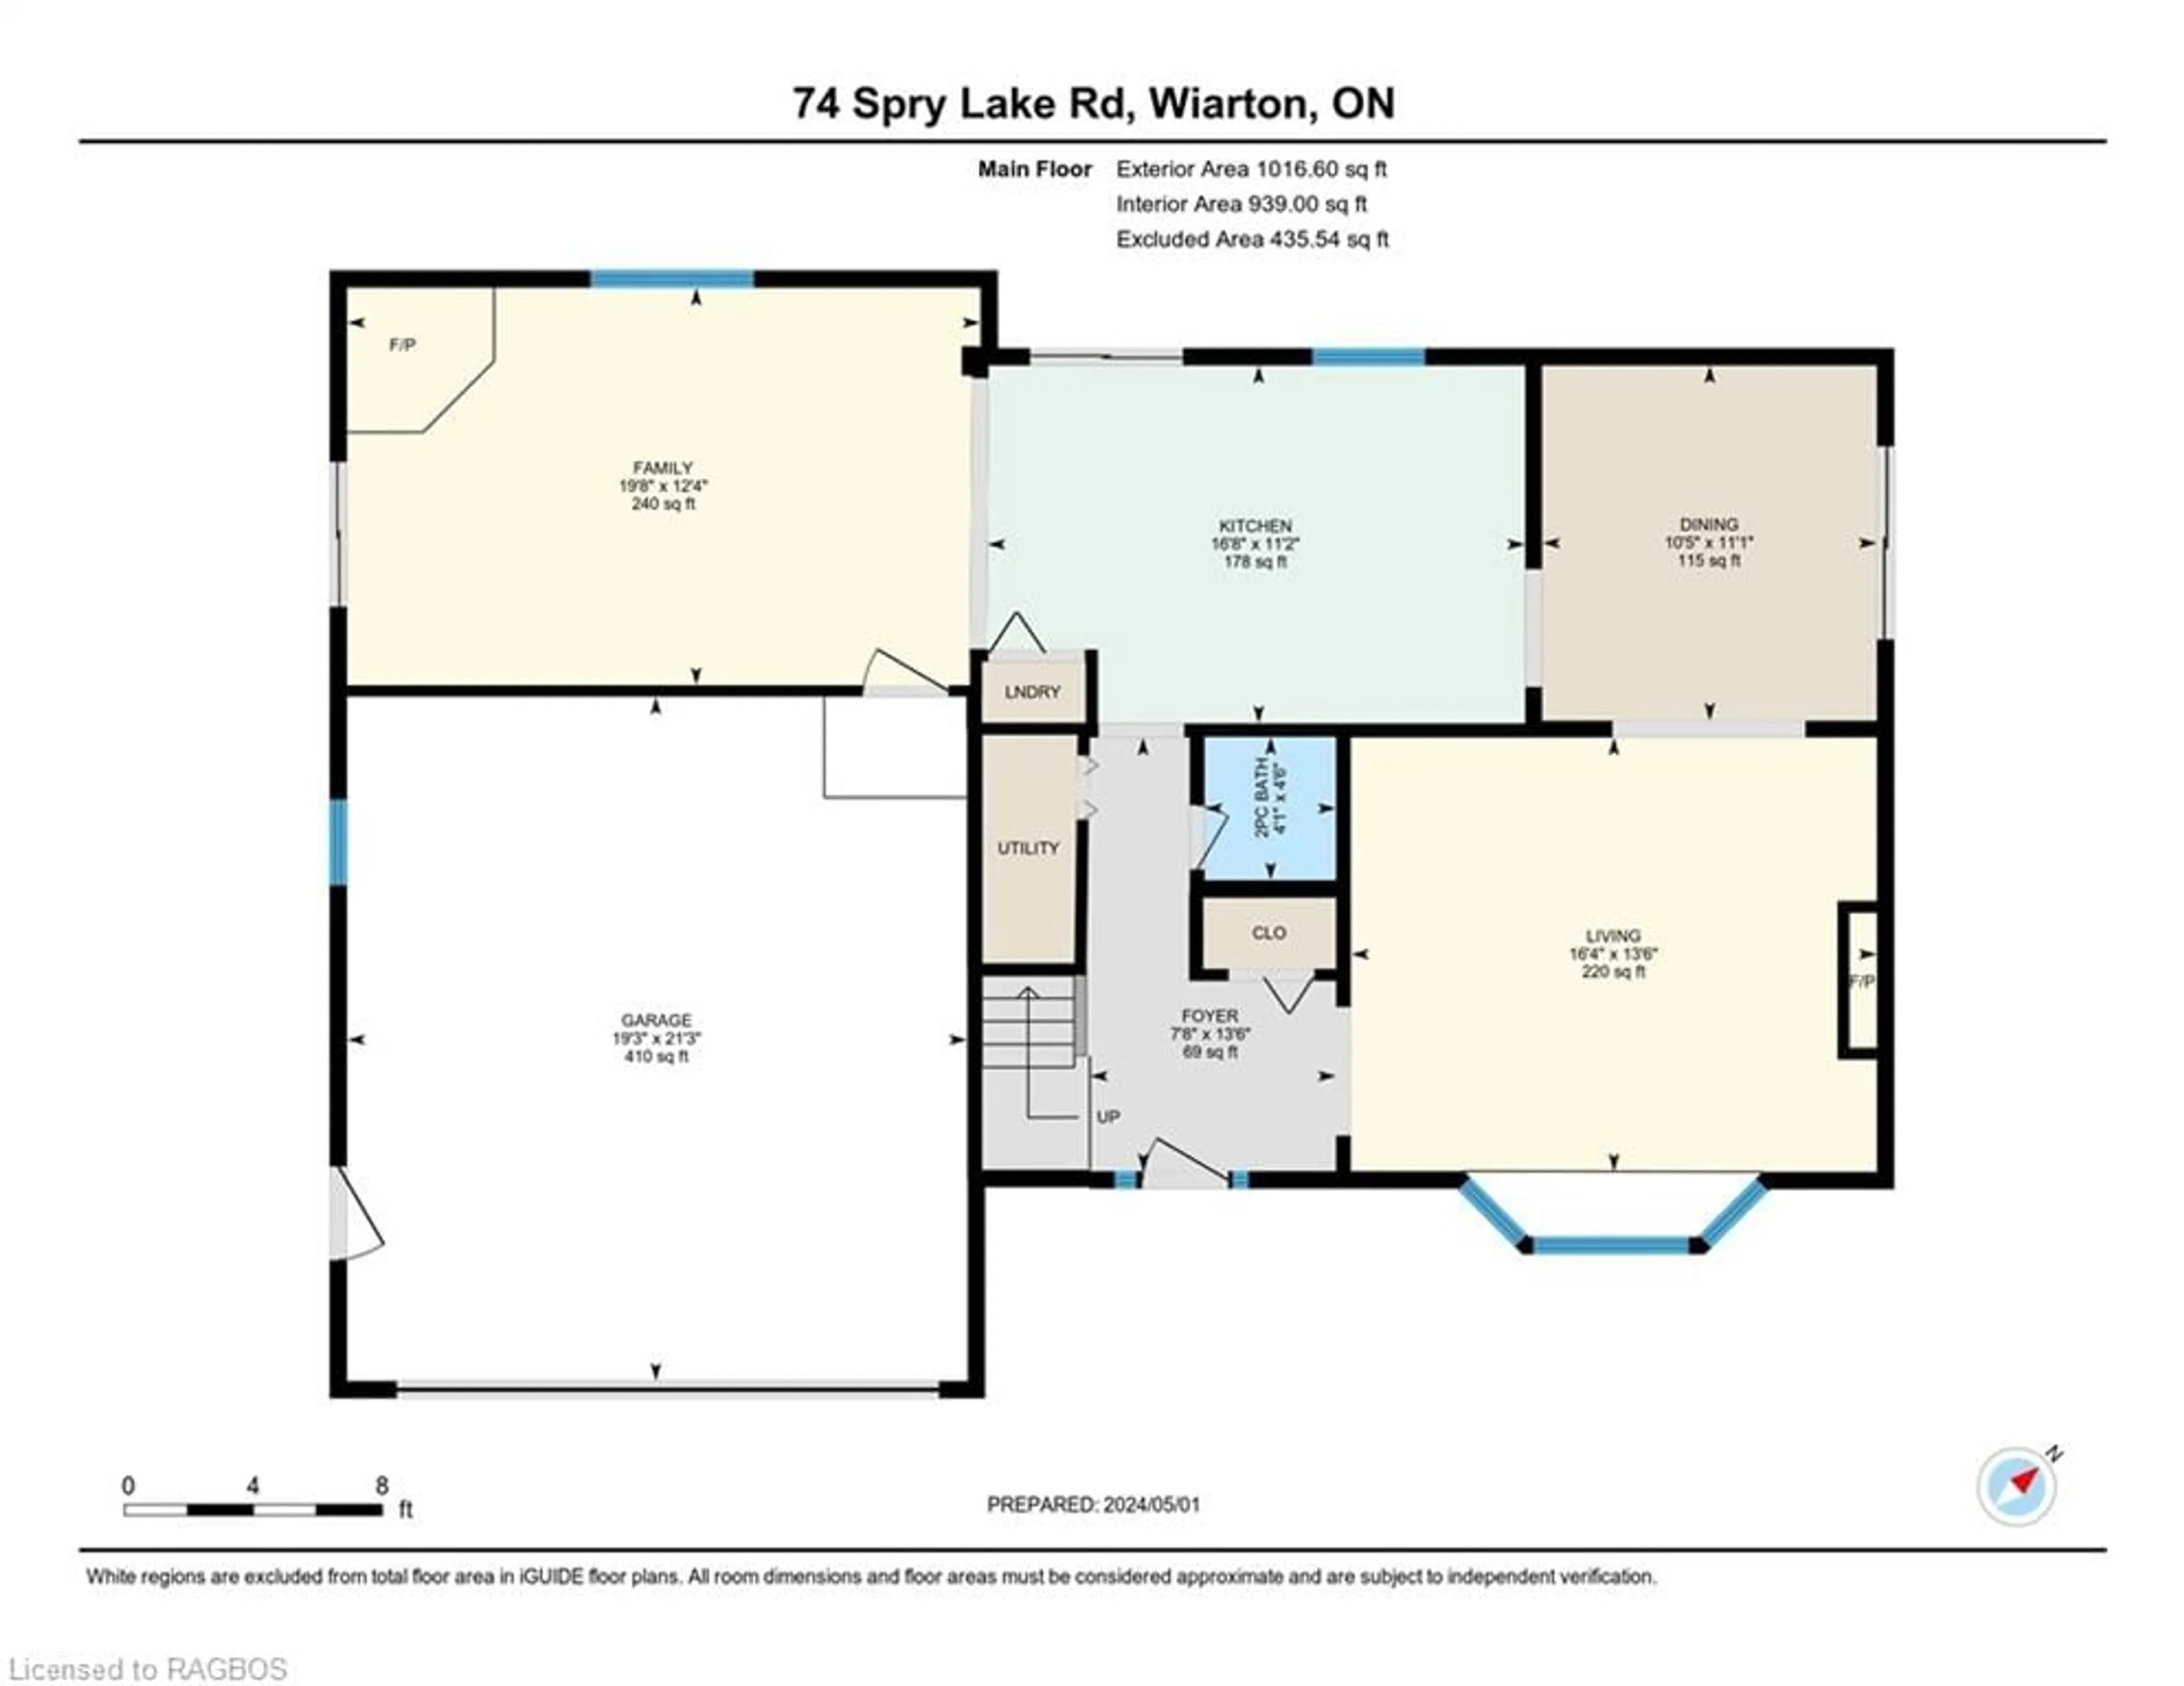 Floor plan for 74 Spry Lake Rd, Oliphant Ontario N0H 2T0